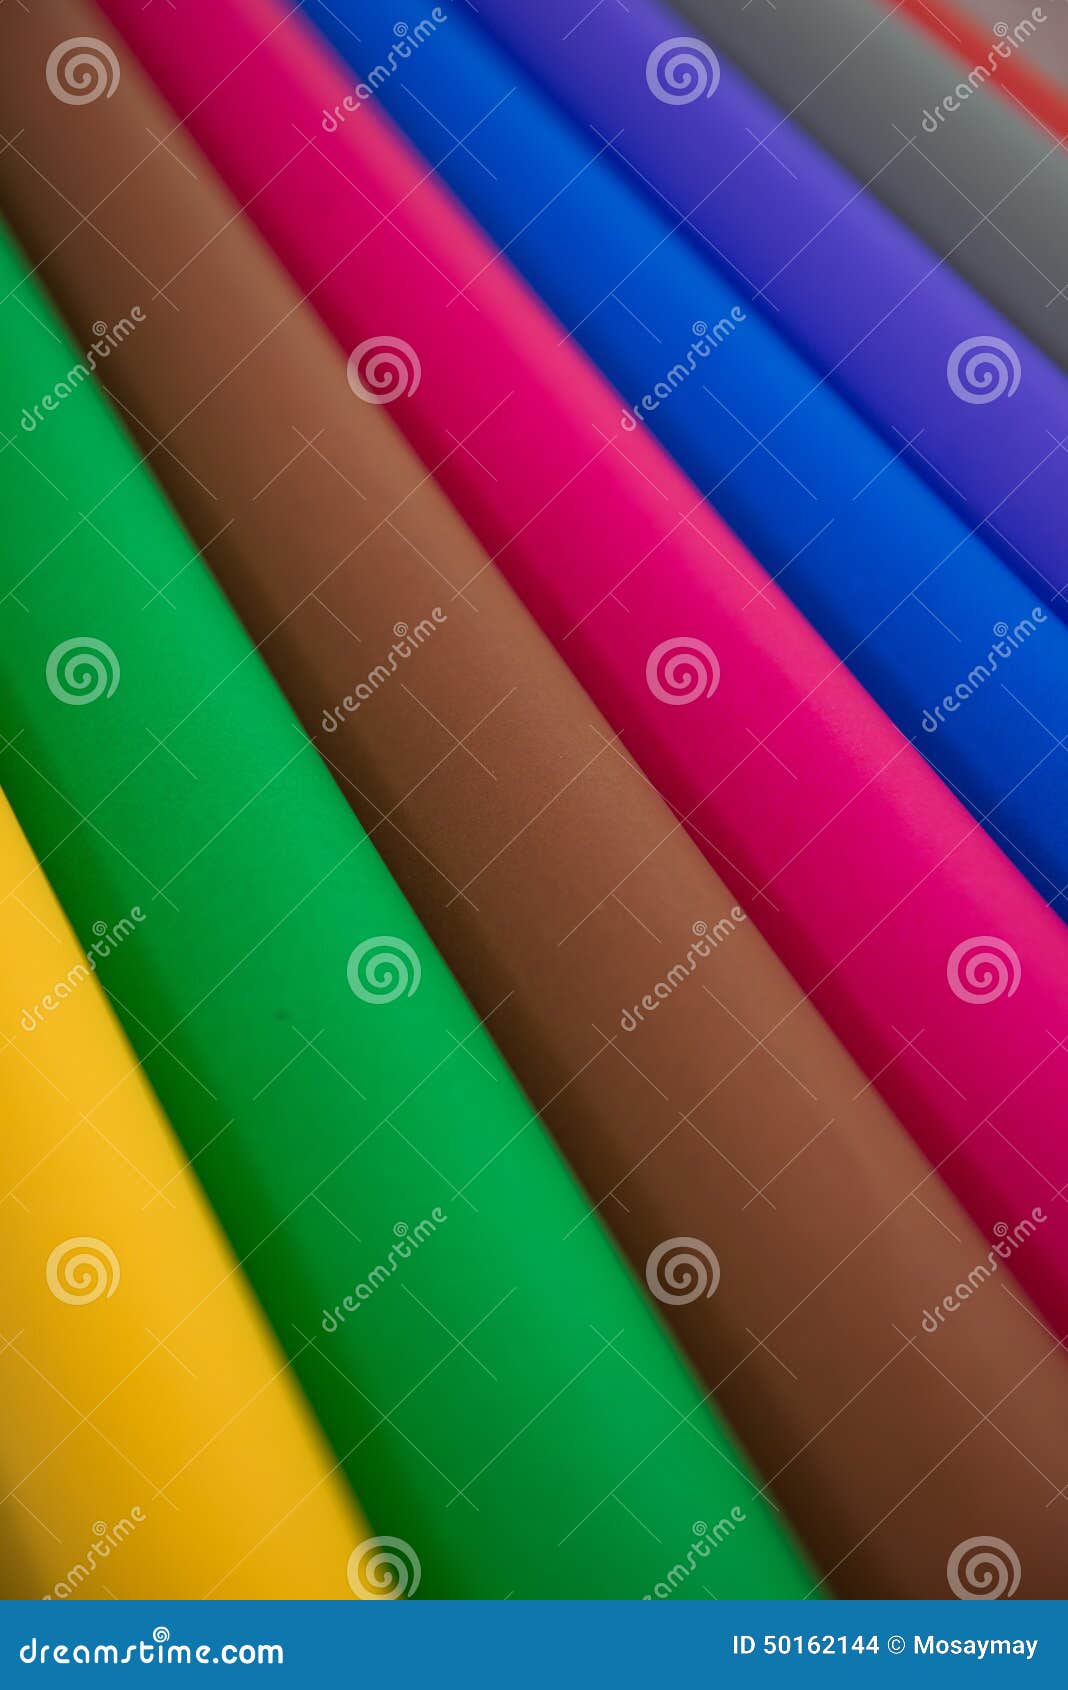 Lot of Color Paper for Crafts Idea Stock Photo - Image of green